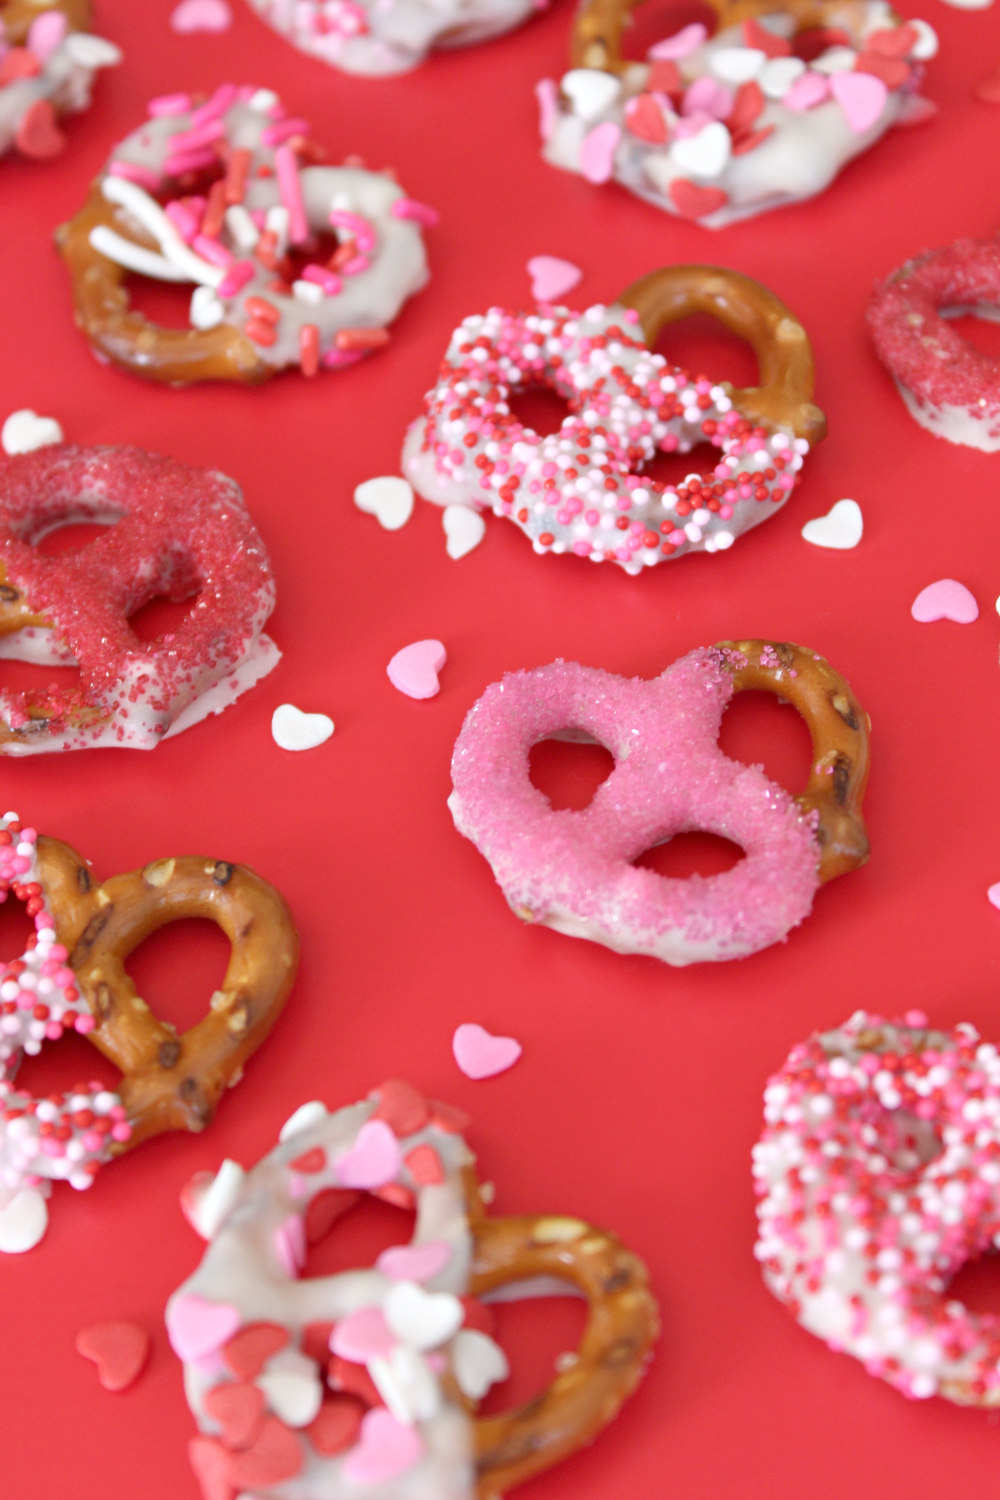 Blogger Stephanie Ziajka shares how to make white chocolate dipped pretzels for Valentines on Diary of a Debutante